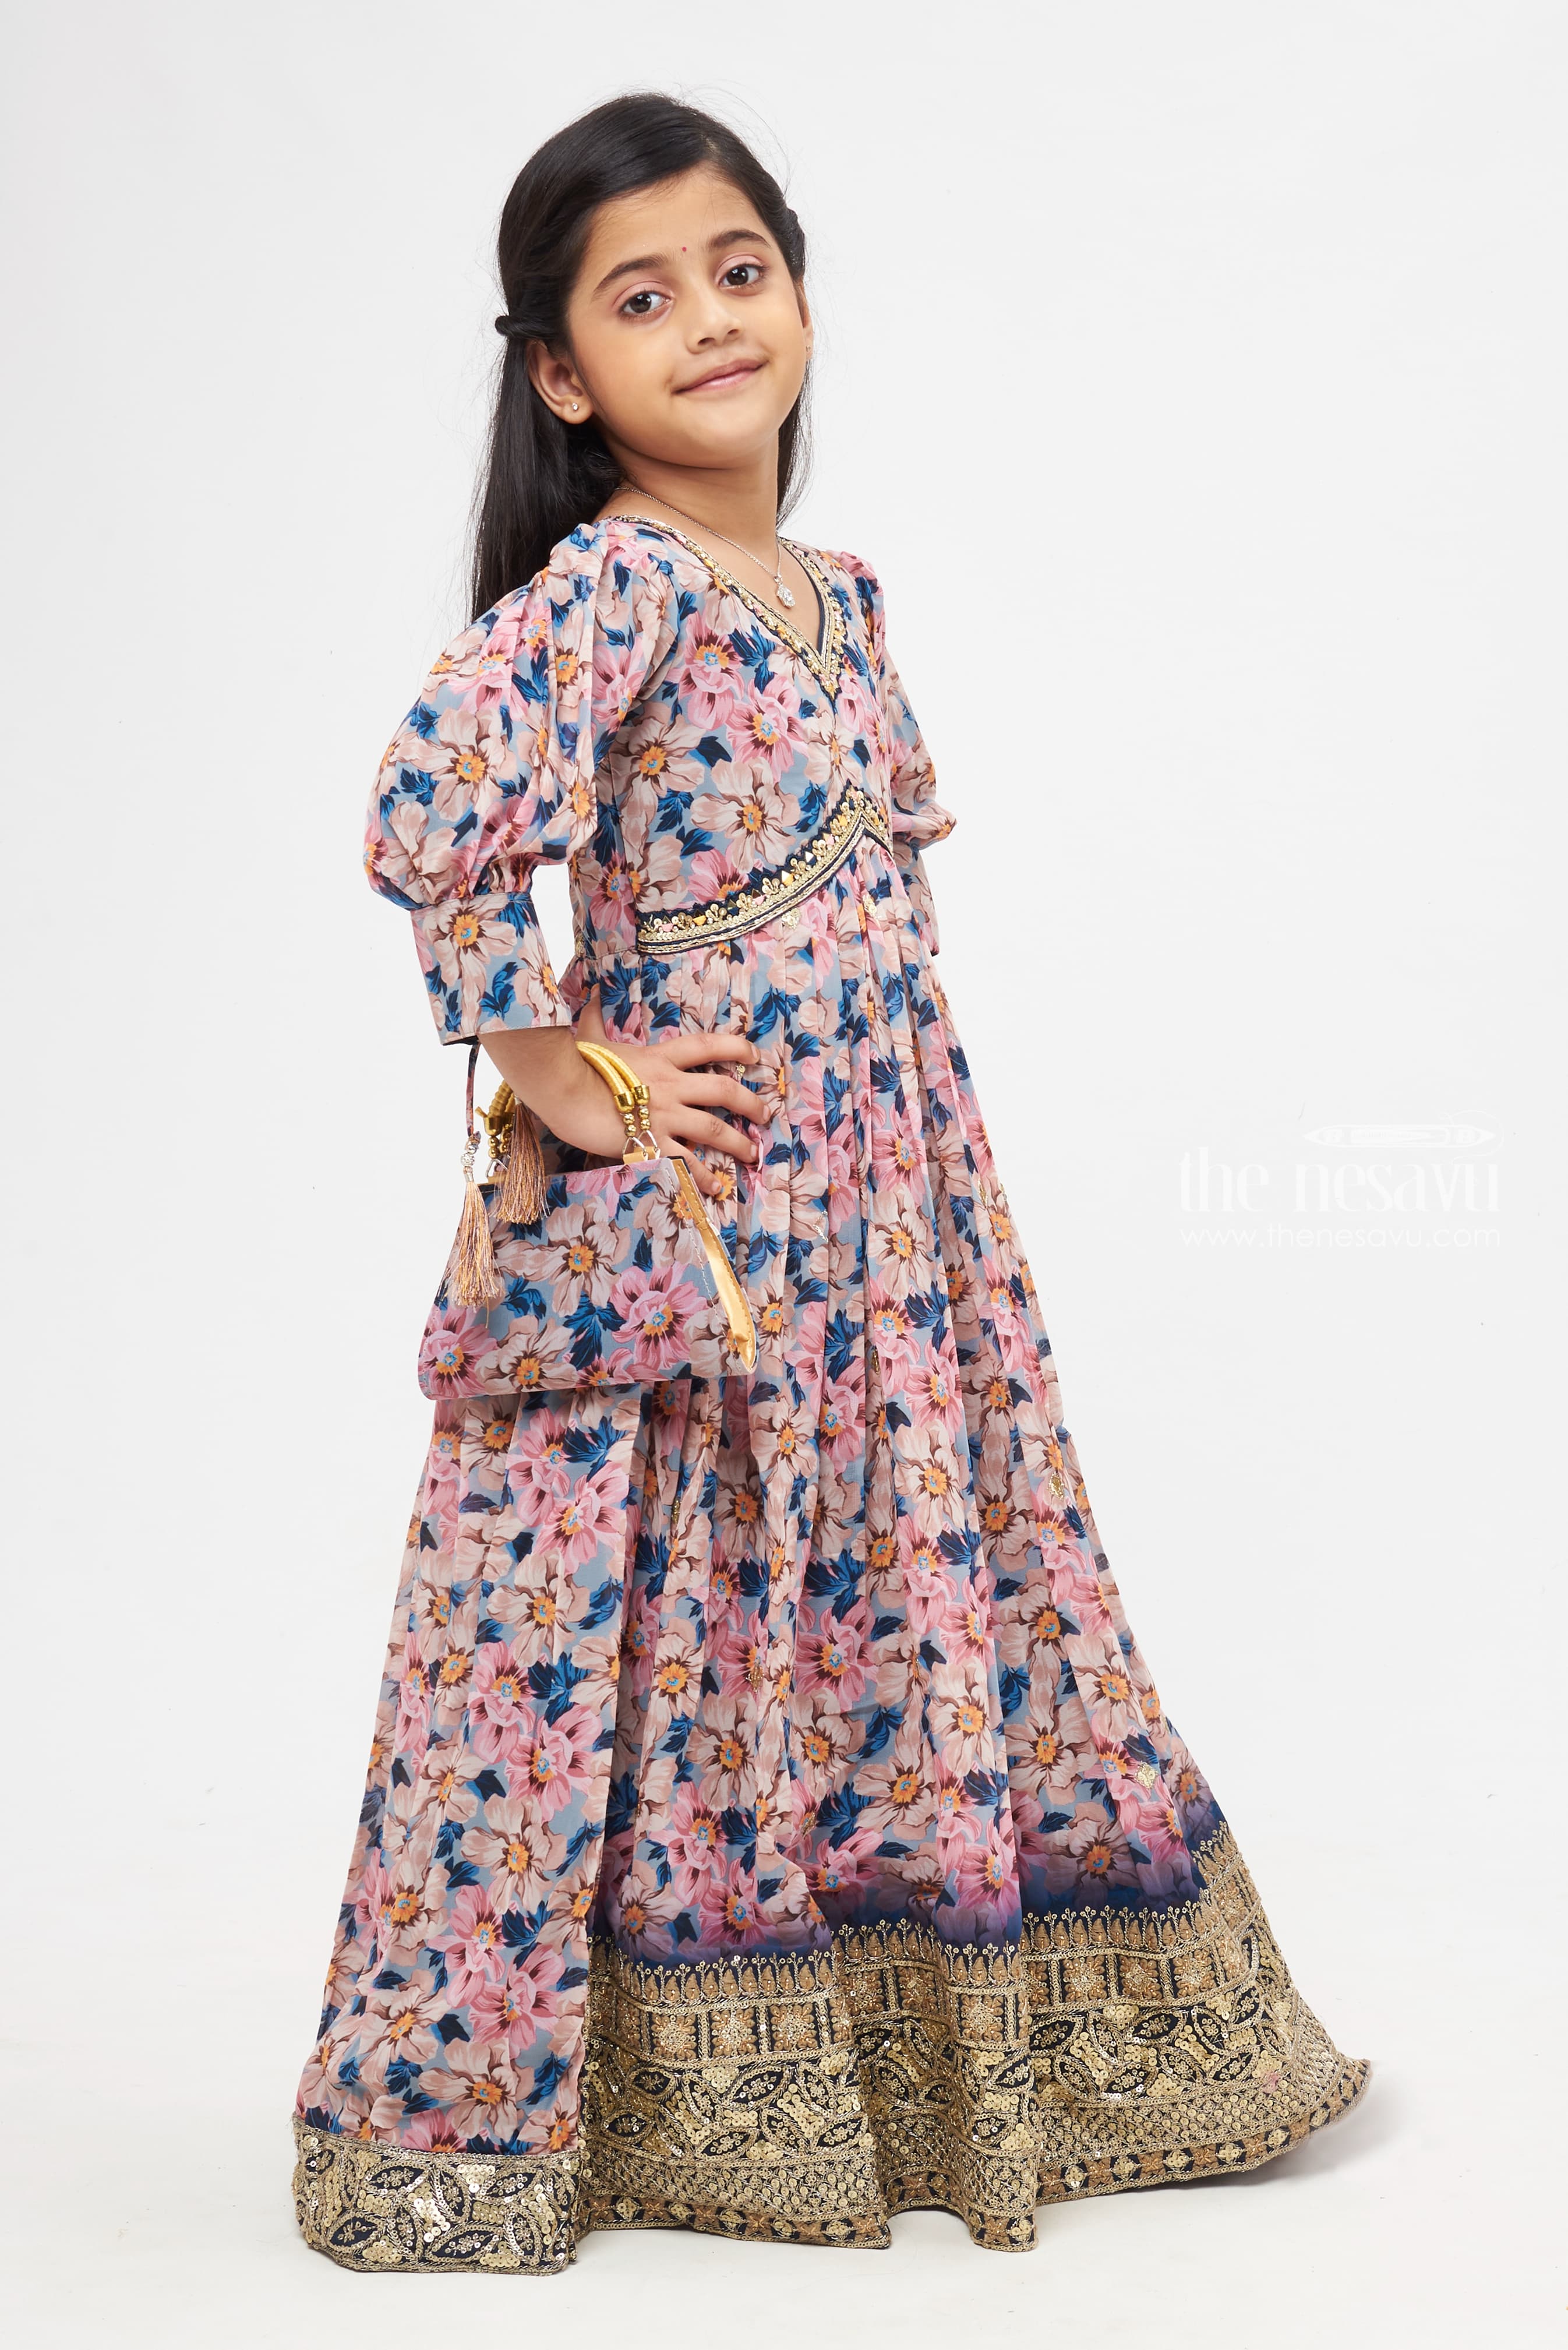 nesavu ethereal floral diwali anarkali gown with exquisite sequin embellishments for girls girls party gown thenesavu pastel floral designer anarkali gown diwali special girls festive 5ca38db4 a4f5 4fce be67 ea0a9bf2d188